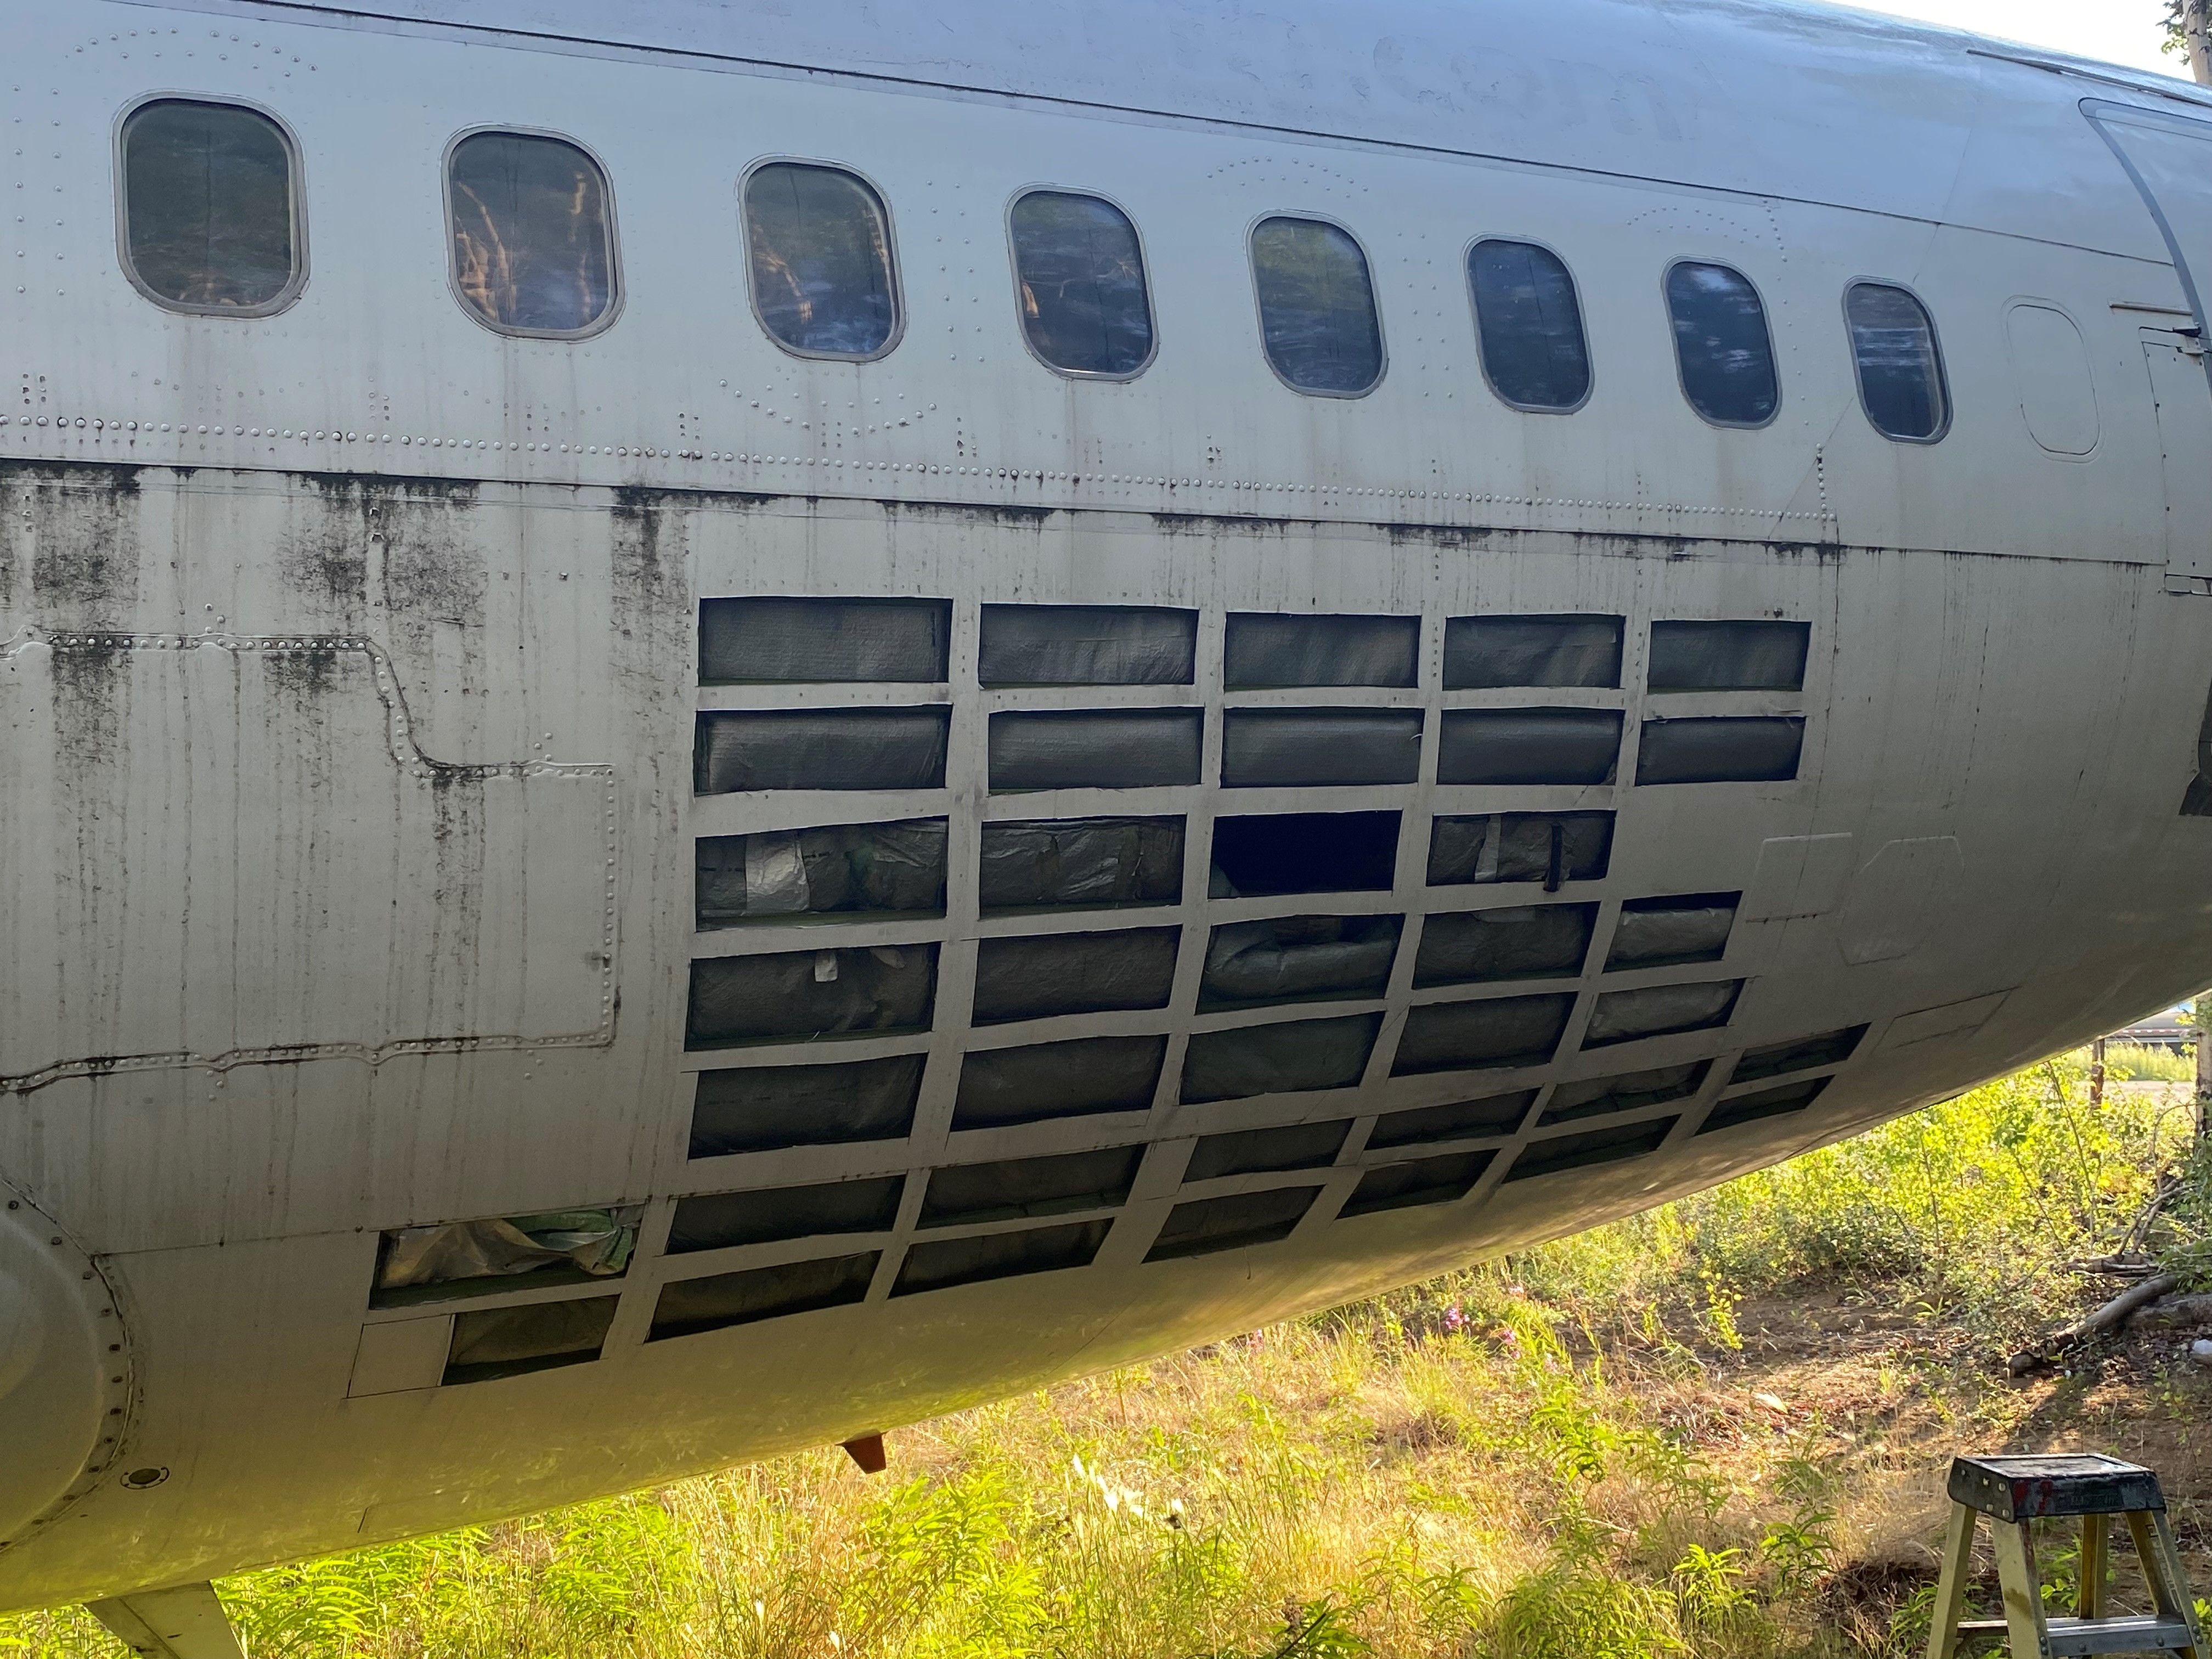 Air North Boeing 737-200 being scrapped for AviationTags